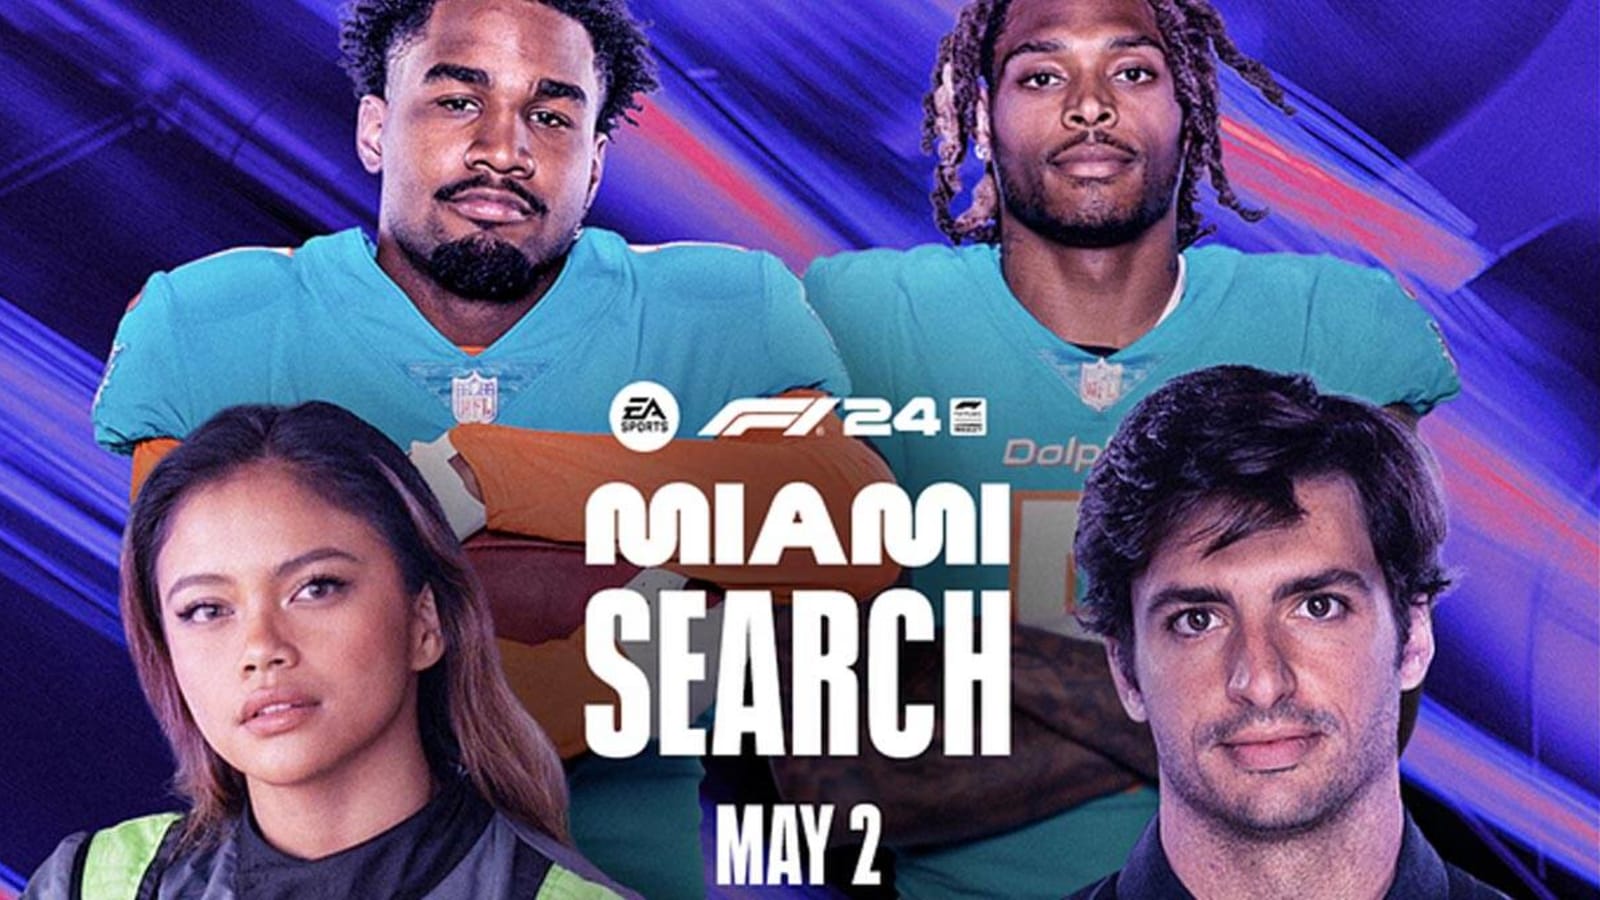 F1 Drivers, NFL Stars To Compete At F1 24 Miami Search Event